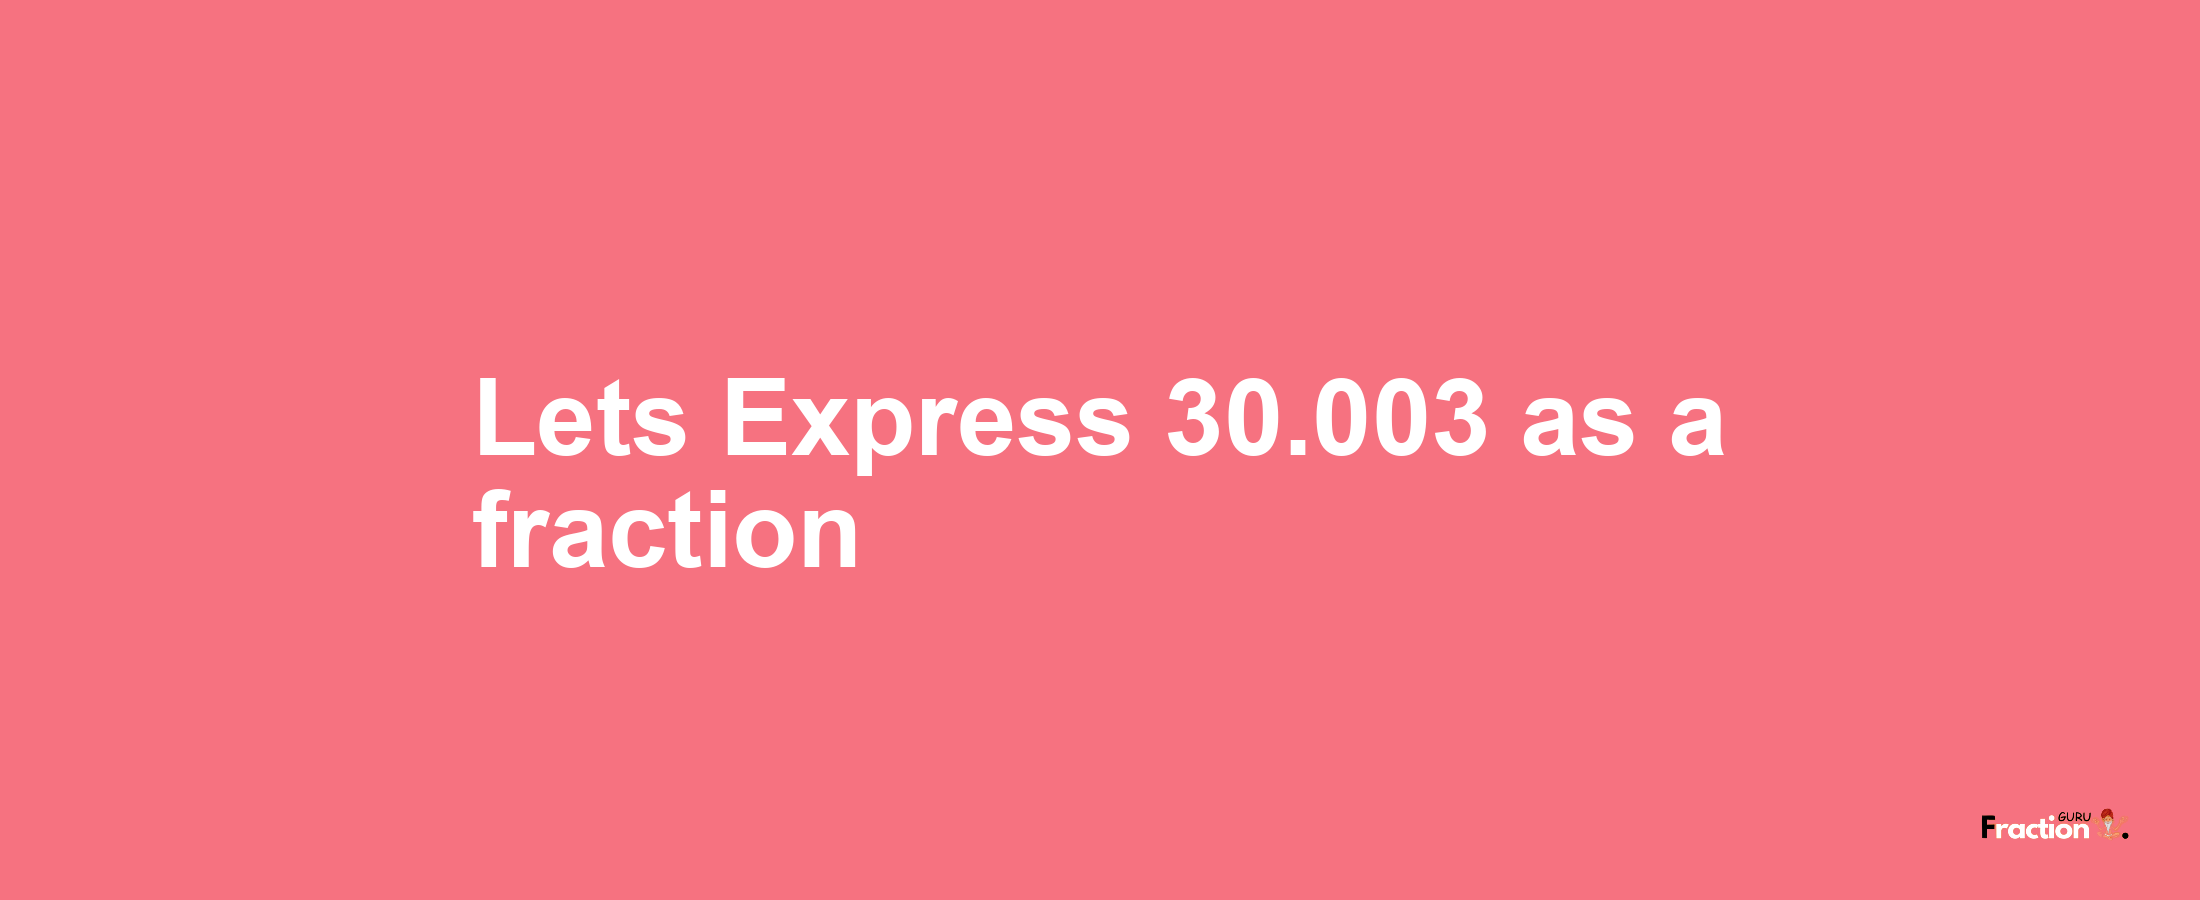 Lets Express 30.003 as afraction